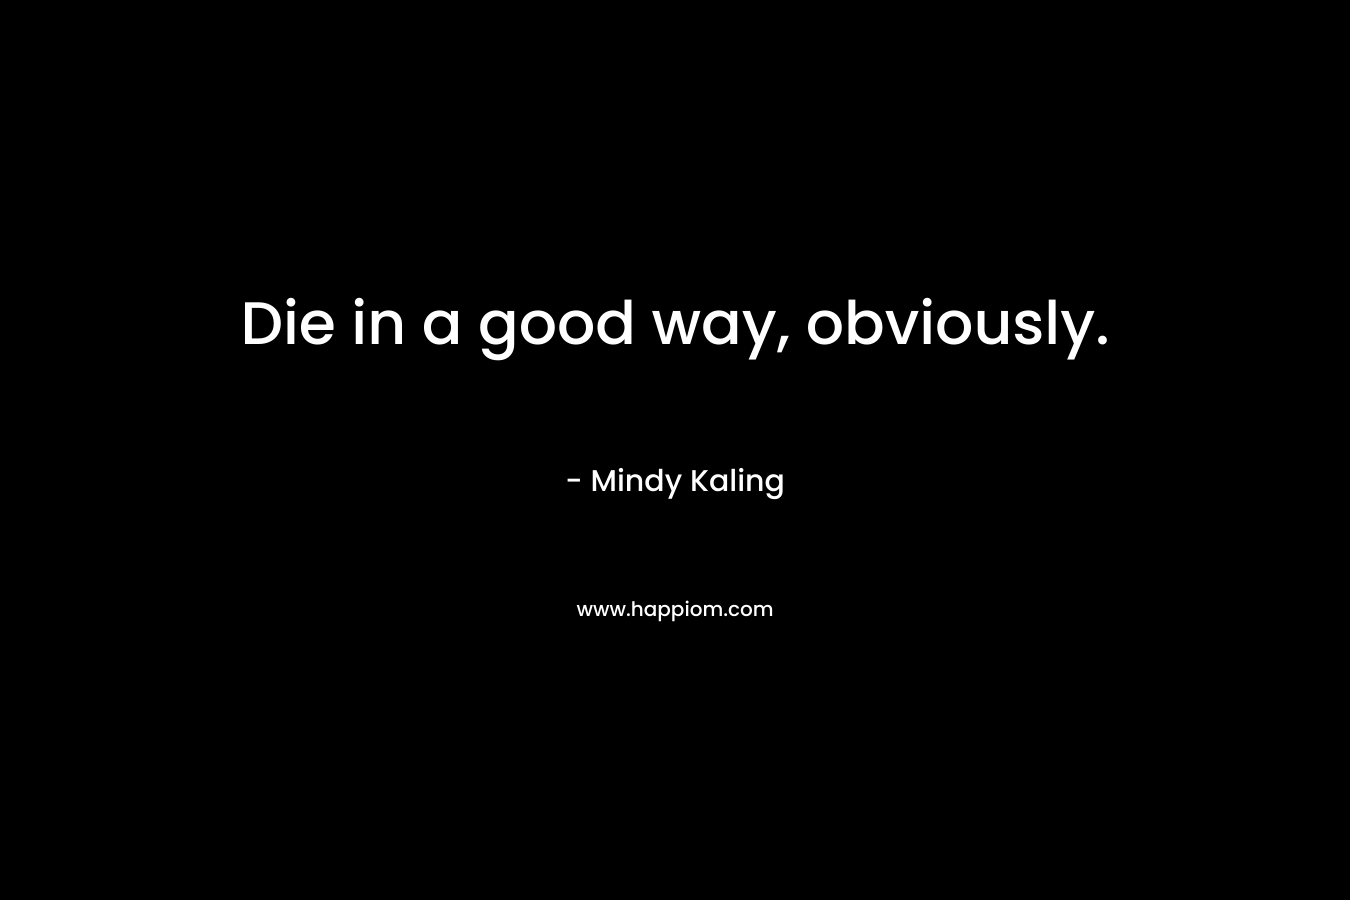 Die in a good way, obviously. – Mindy Kaling